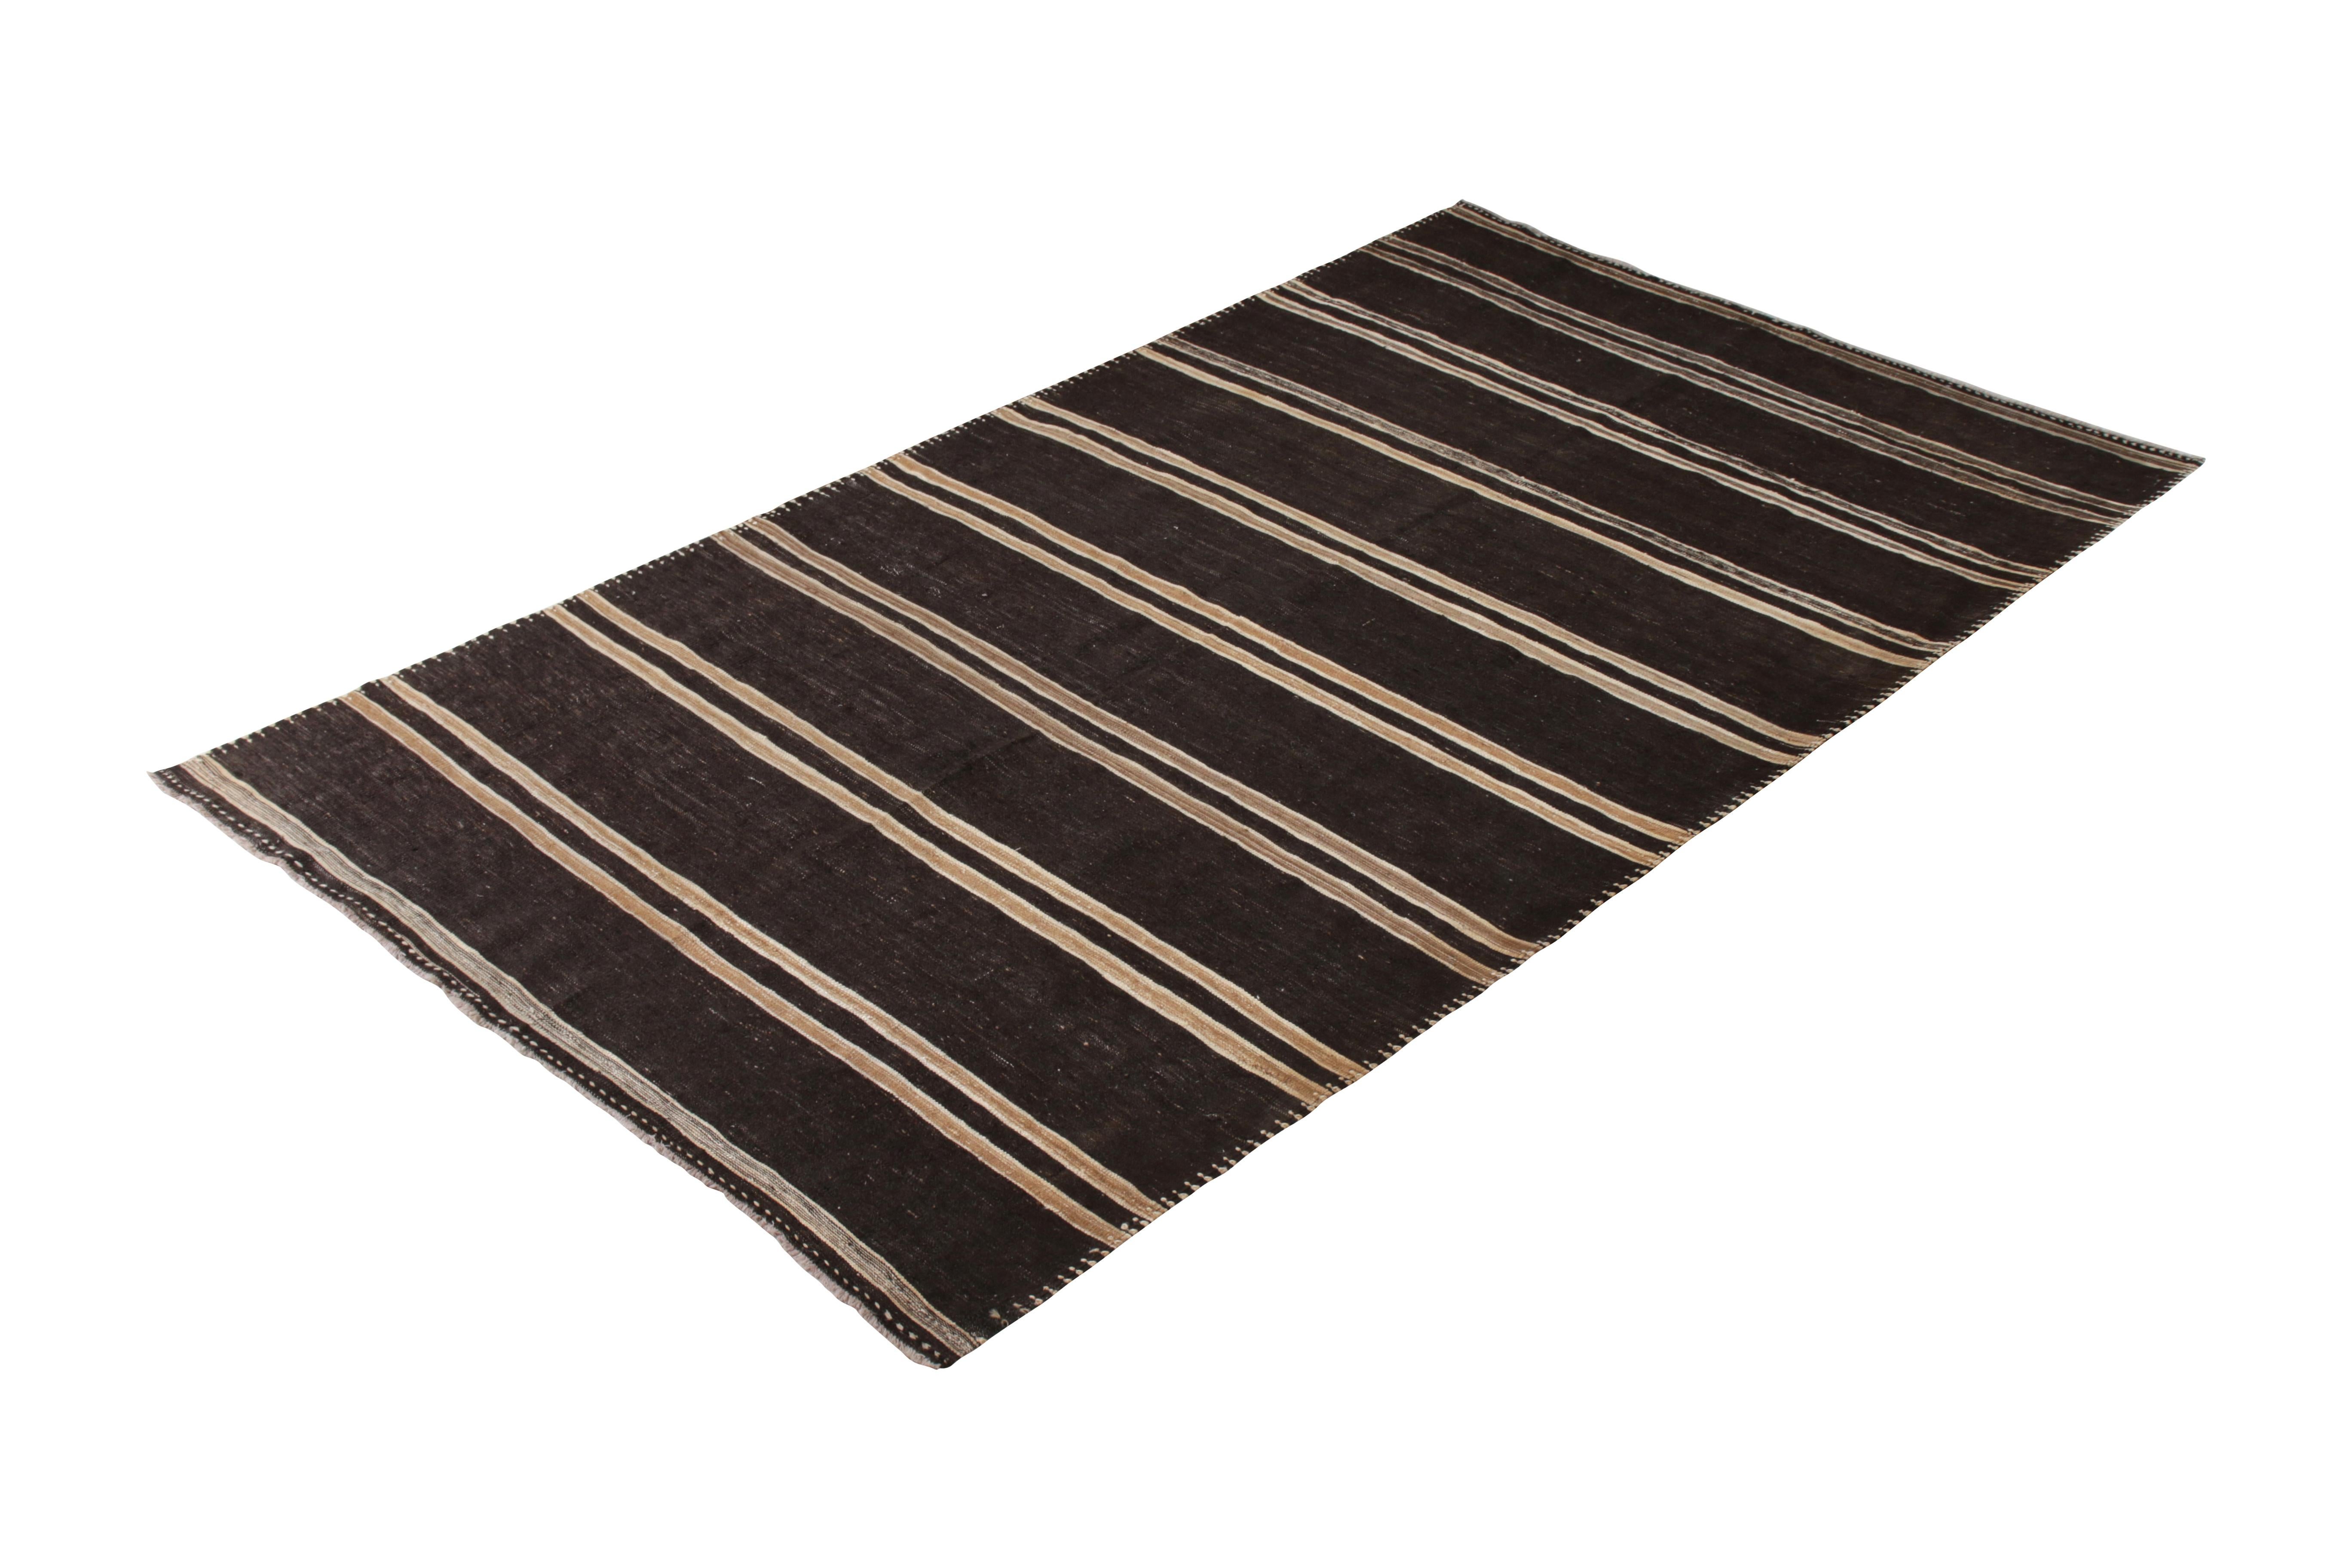 Handmade in a wool flat-weave originating from Turkey circa 1950-1960, this vintage rug is a midcentury Kilim of comfortable color with a complementary striped pattern in a rare 7 x 12 size—well suited in these dimensions to a wider array of